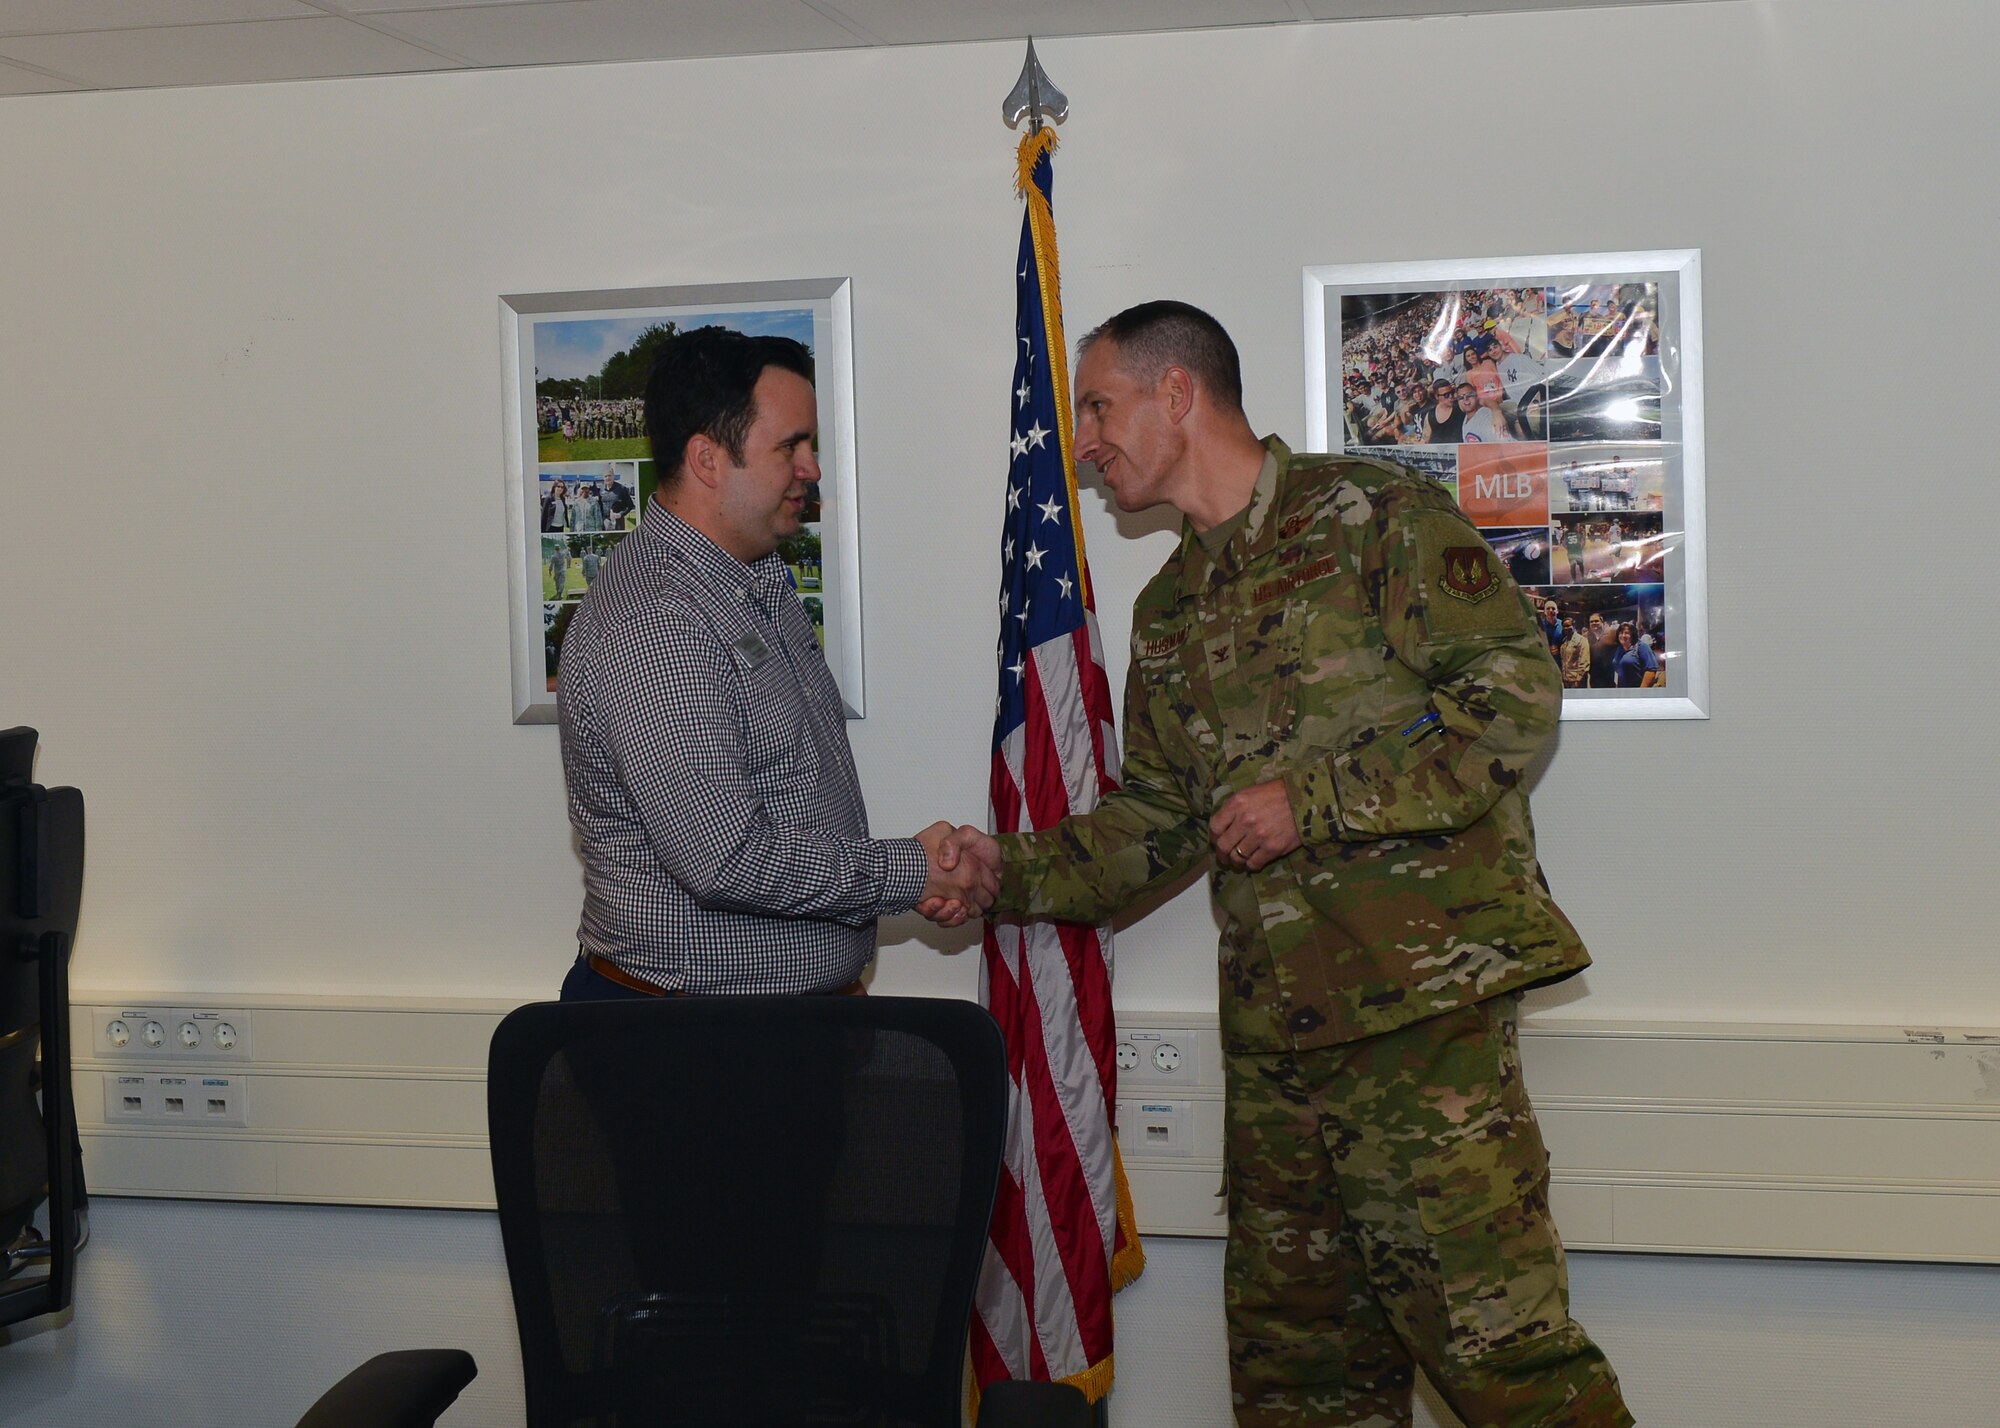 U.S. Air Force Col. Matt S. Husemann, 86th Airlift Wing vice commander, presents Steven Sarandos, 86th Force Support Squadron community cohesion coordinator, with the Airlifter of the Week coin at Ramstein Air Base, Germany, Oct. 2, 2019. Sarandos was recognized for his work in coordinating morale events for Airmen to help them build and maintain resiliency. (U.S. Air Force photo by Staff Sgt. Jimmie D. Pike)